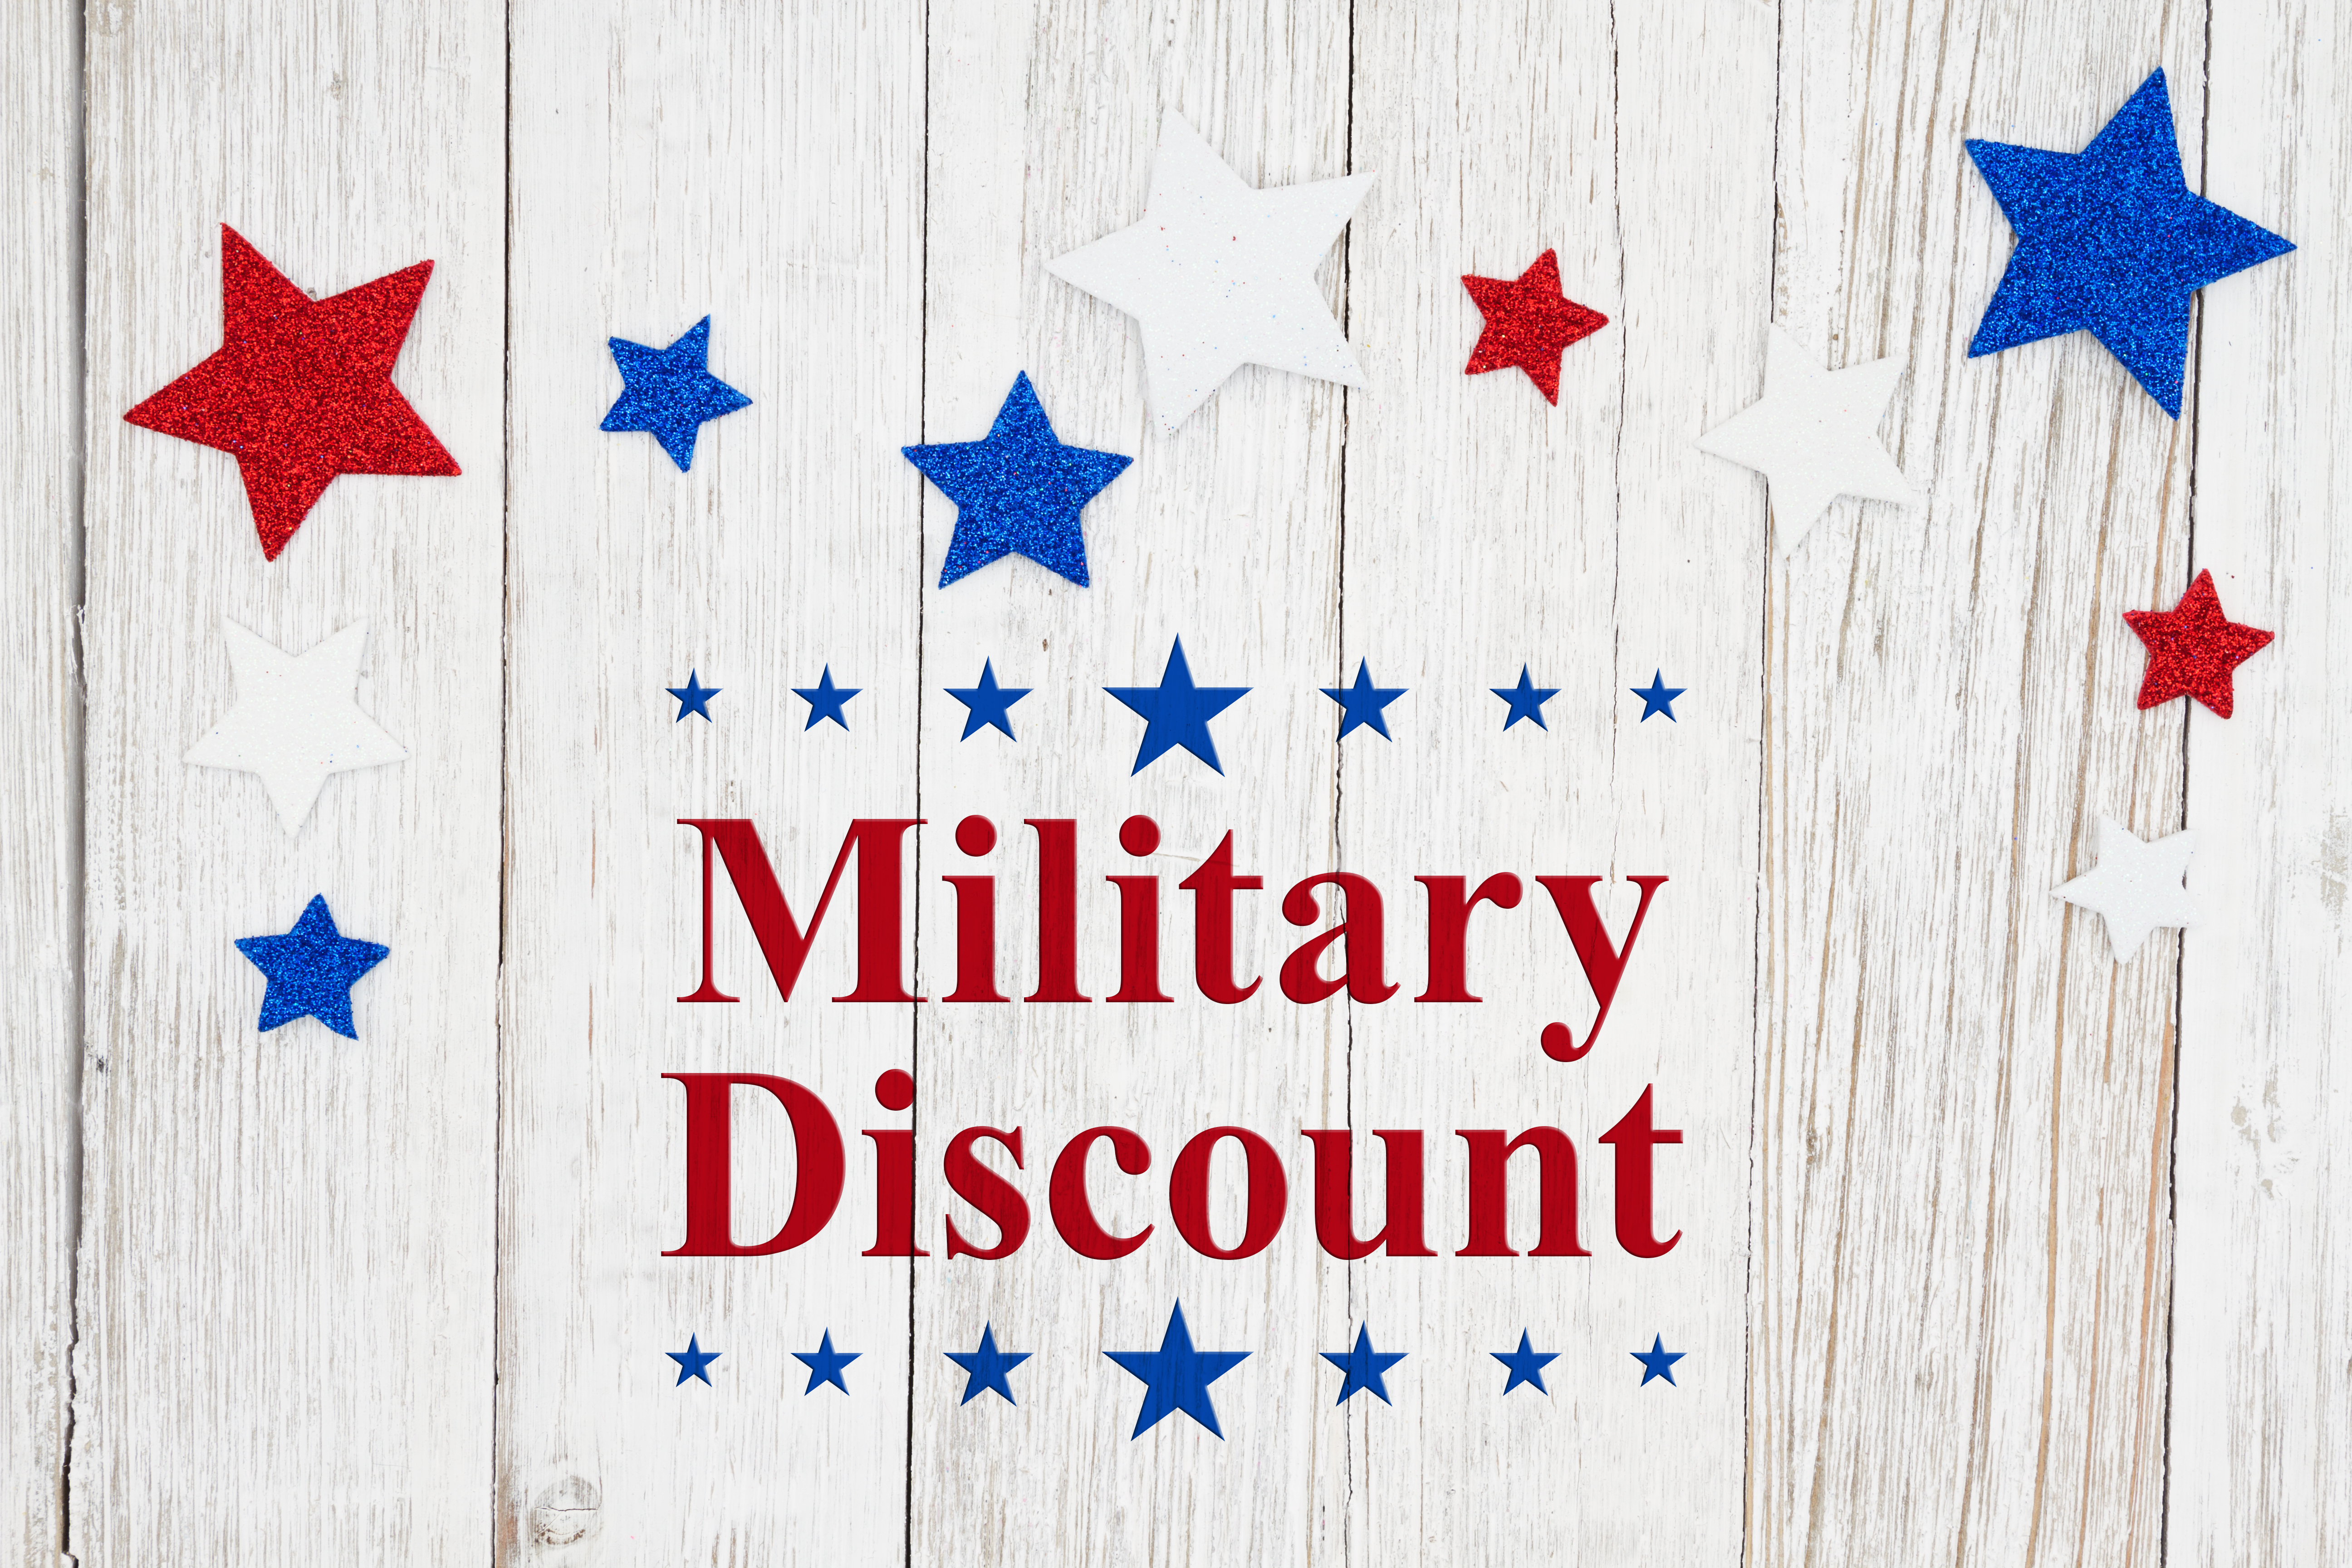 Military Discount Shutterstock 1496042906